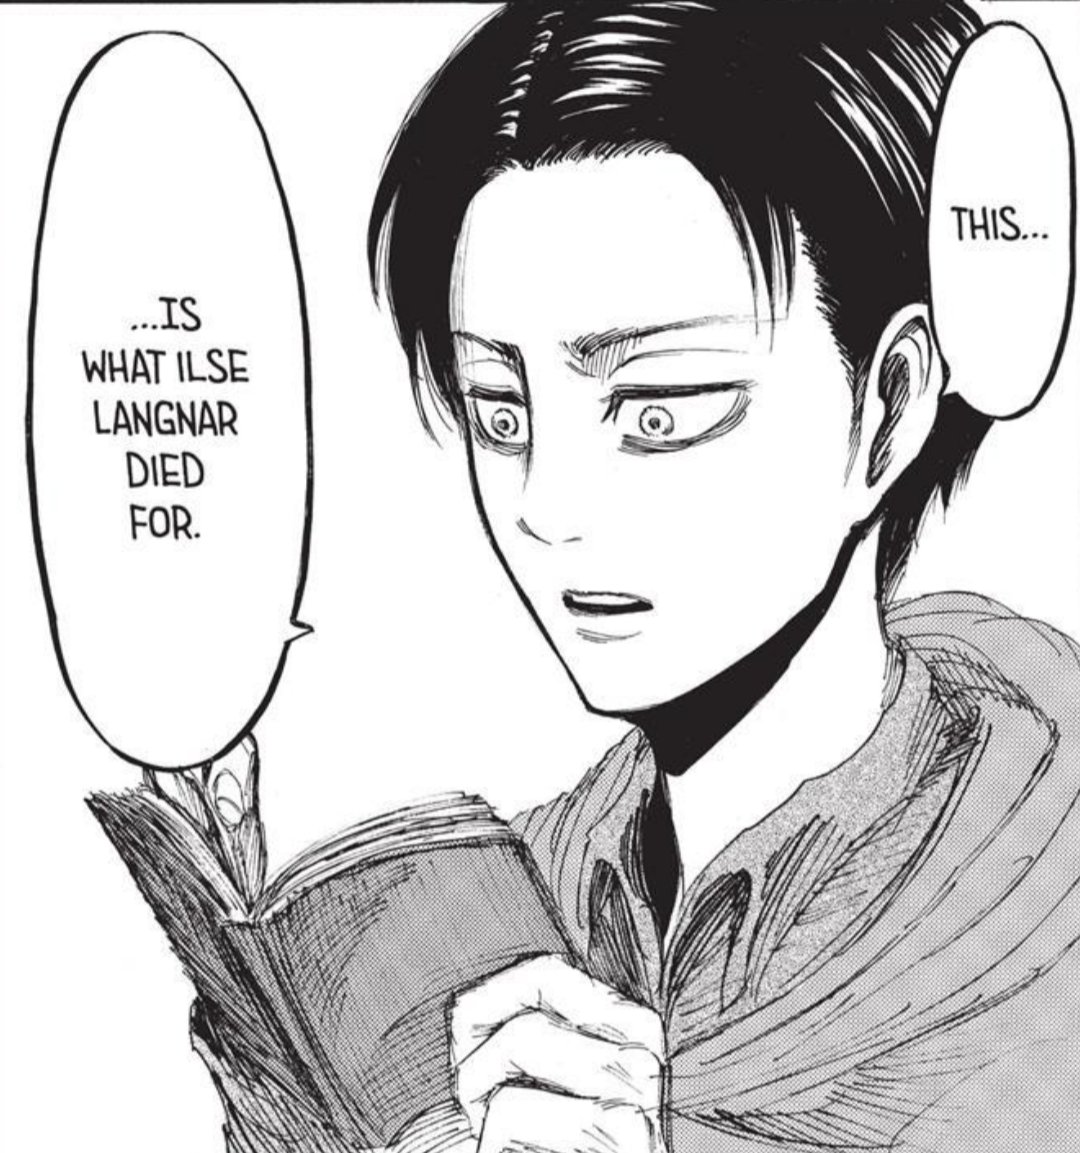 +in one of the bonus chapters (ilse's journal) the ones who found the journal were levi and hanji.